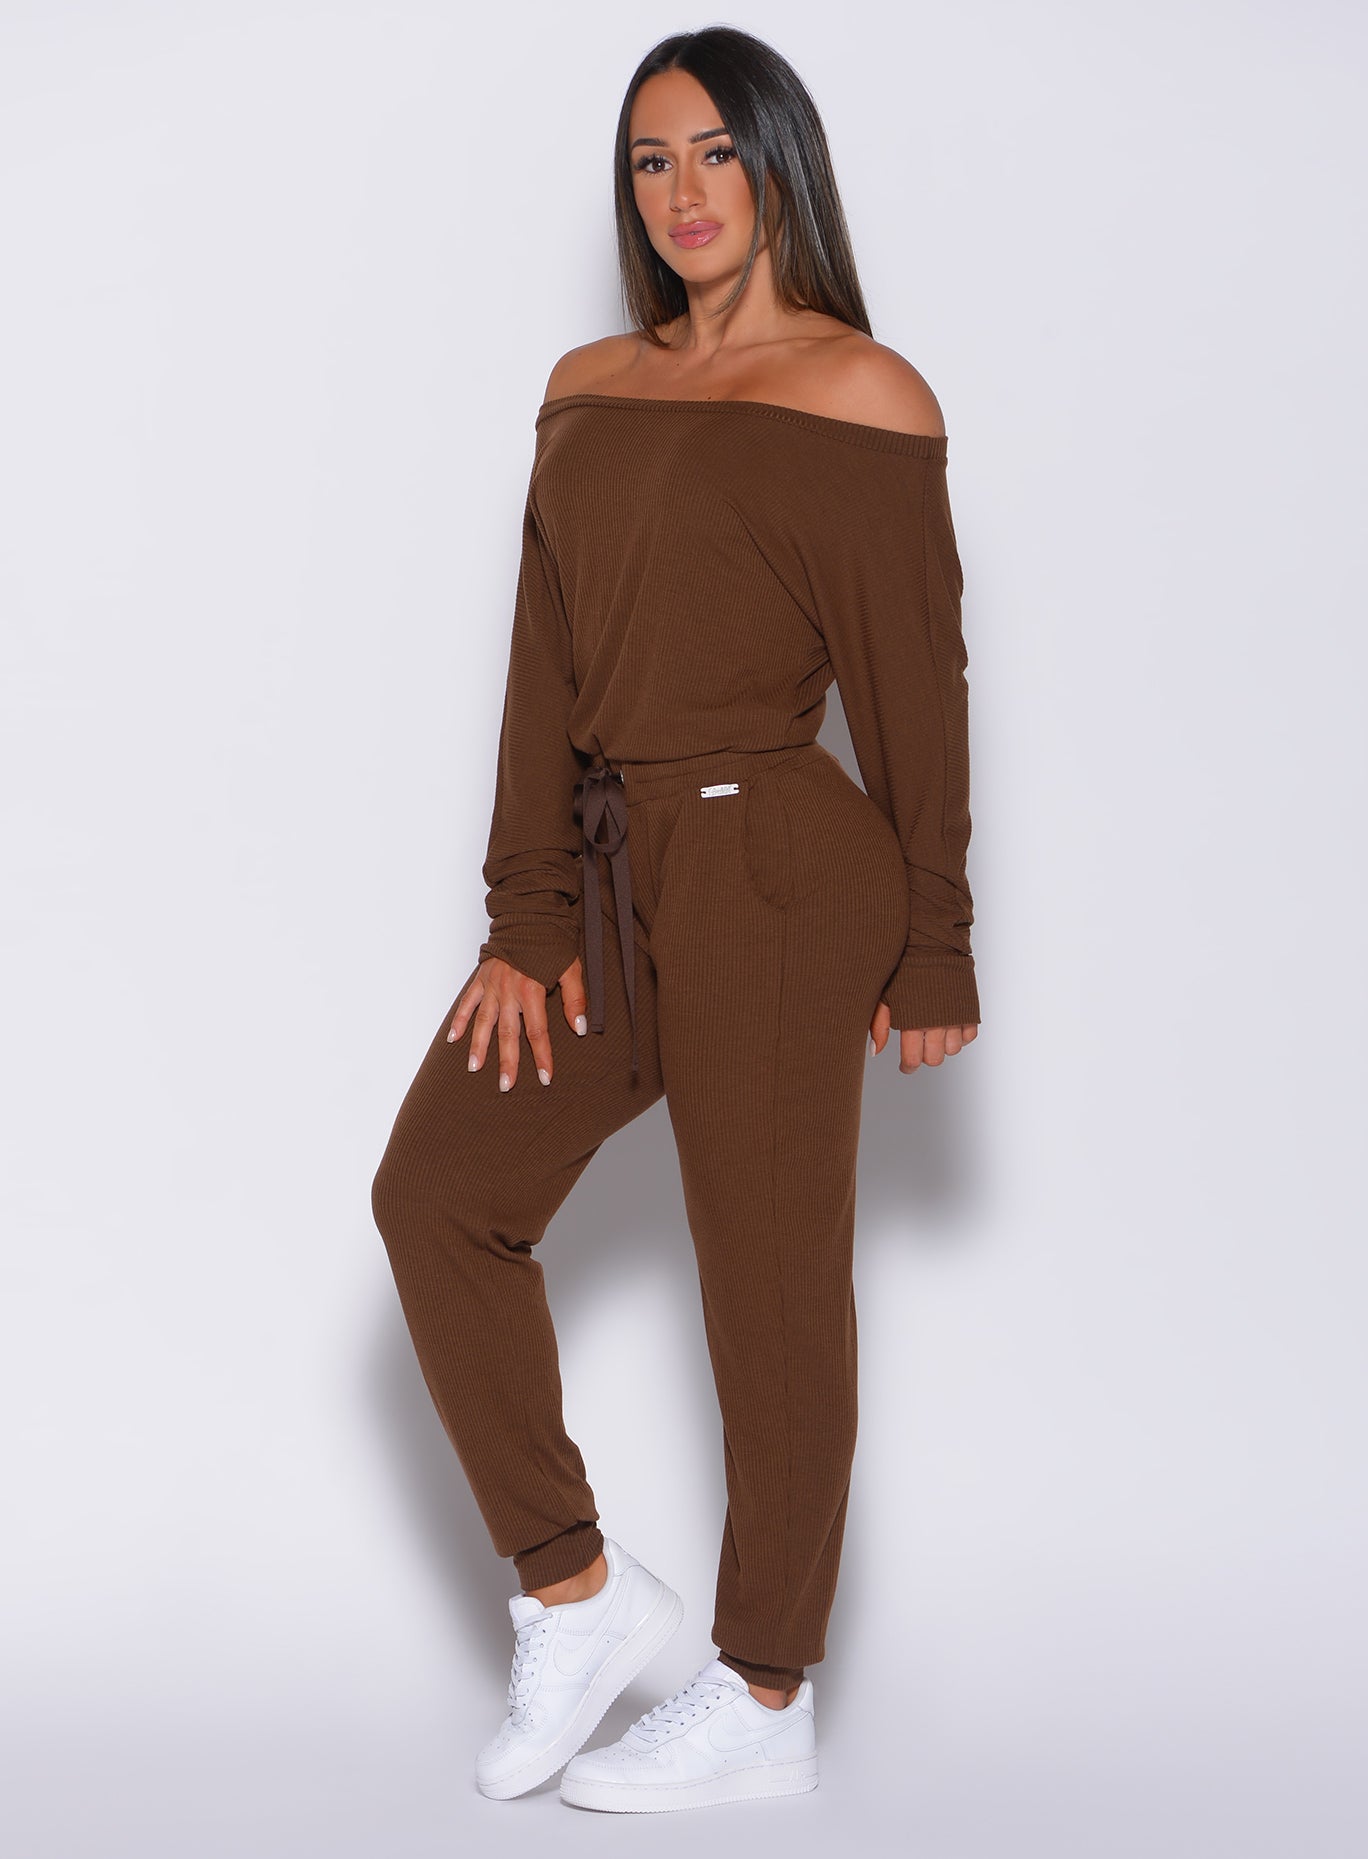 Front profile view of a model facing forward wearing our rib jumpsuit in expresso color